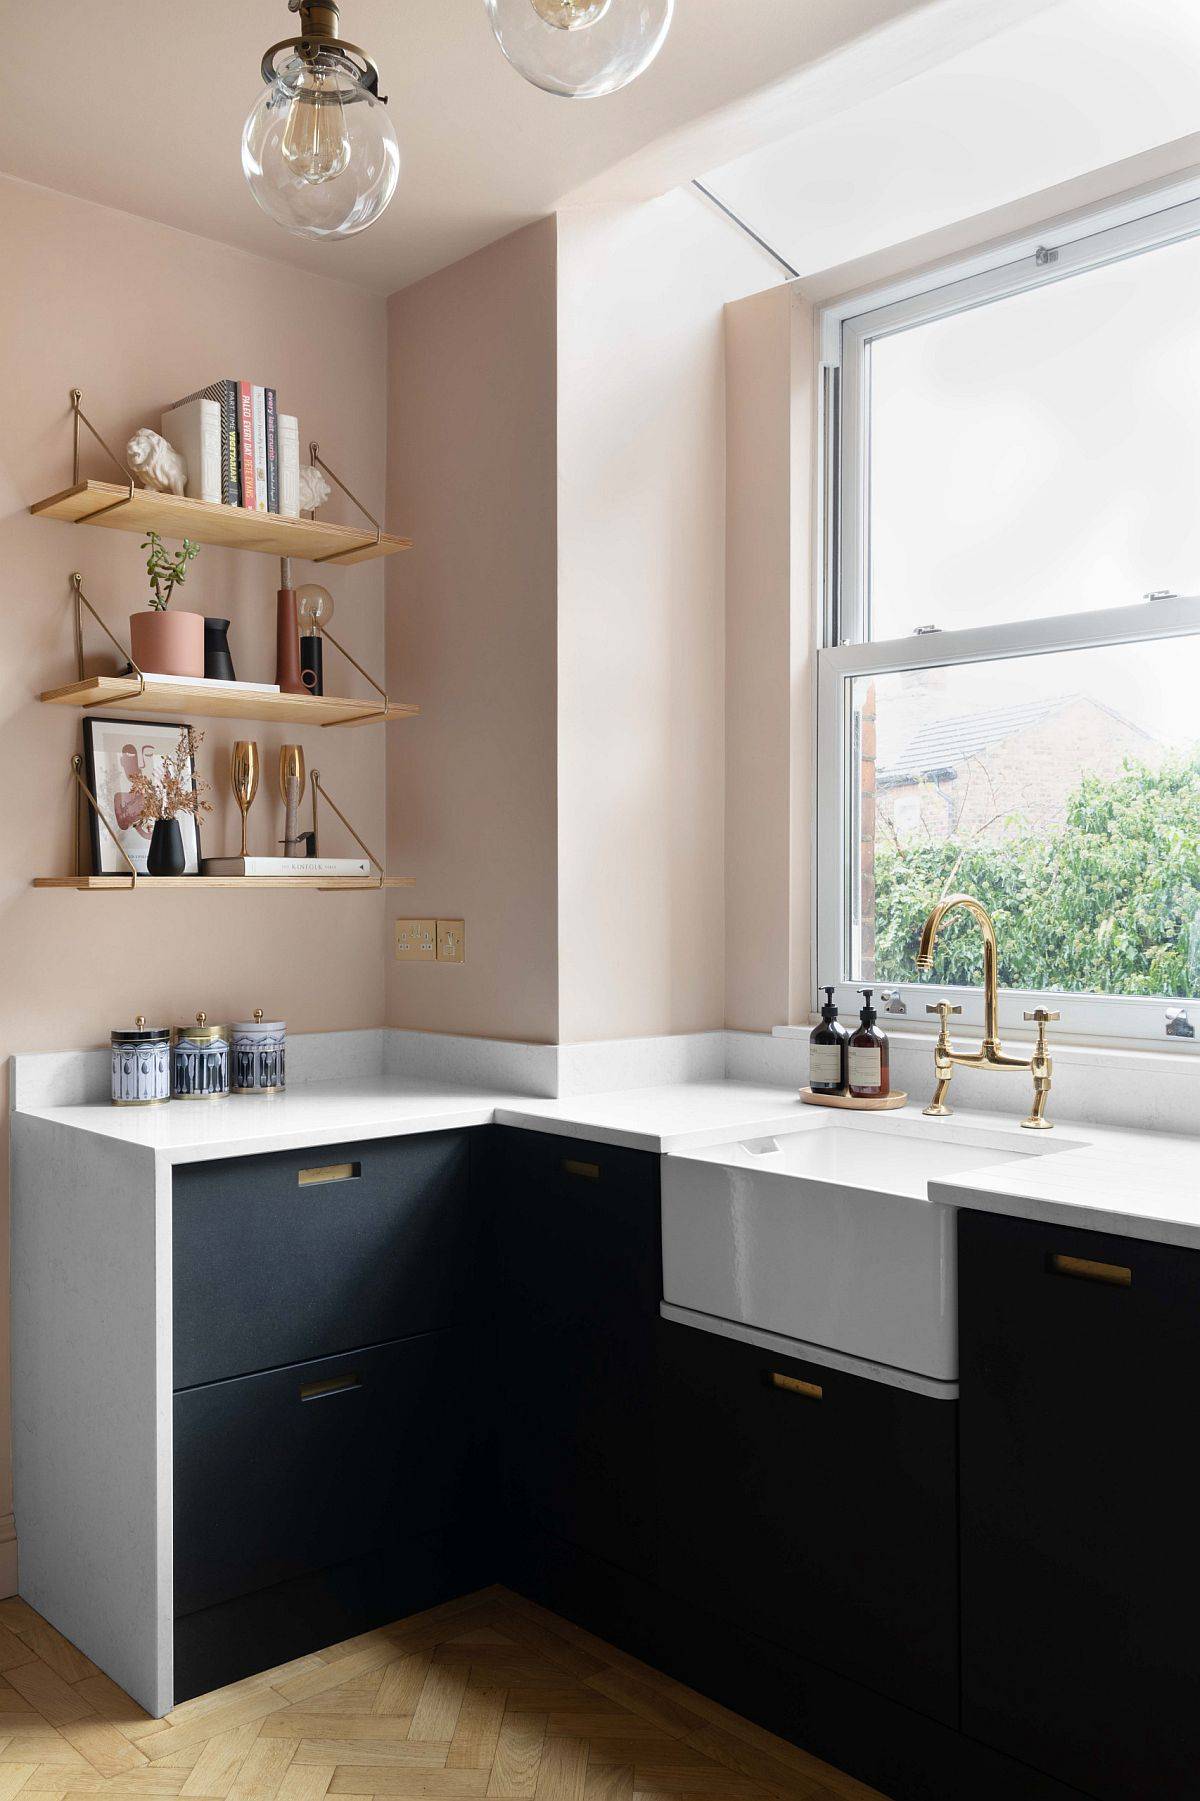 Gorgeous sink in white feels like an extension of the kitchen counters